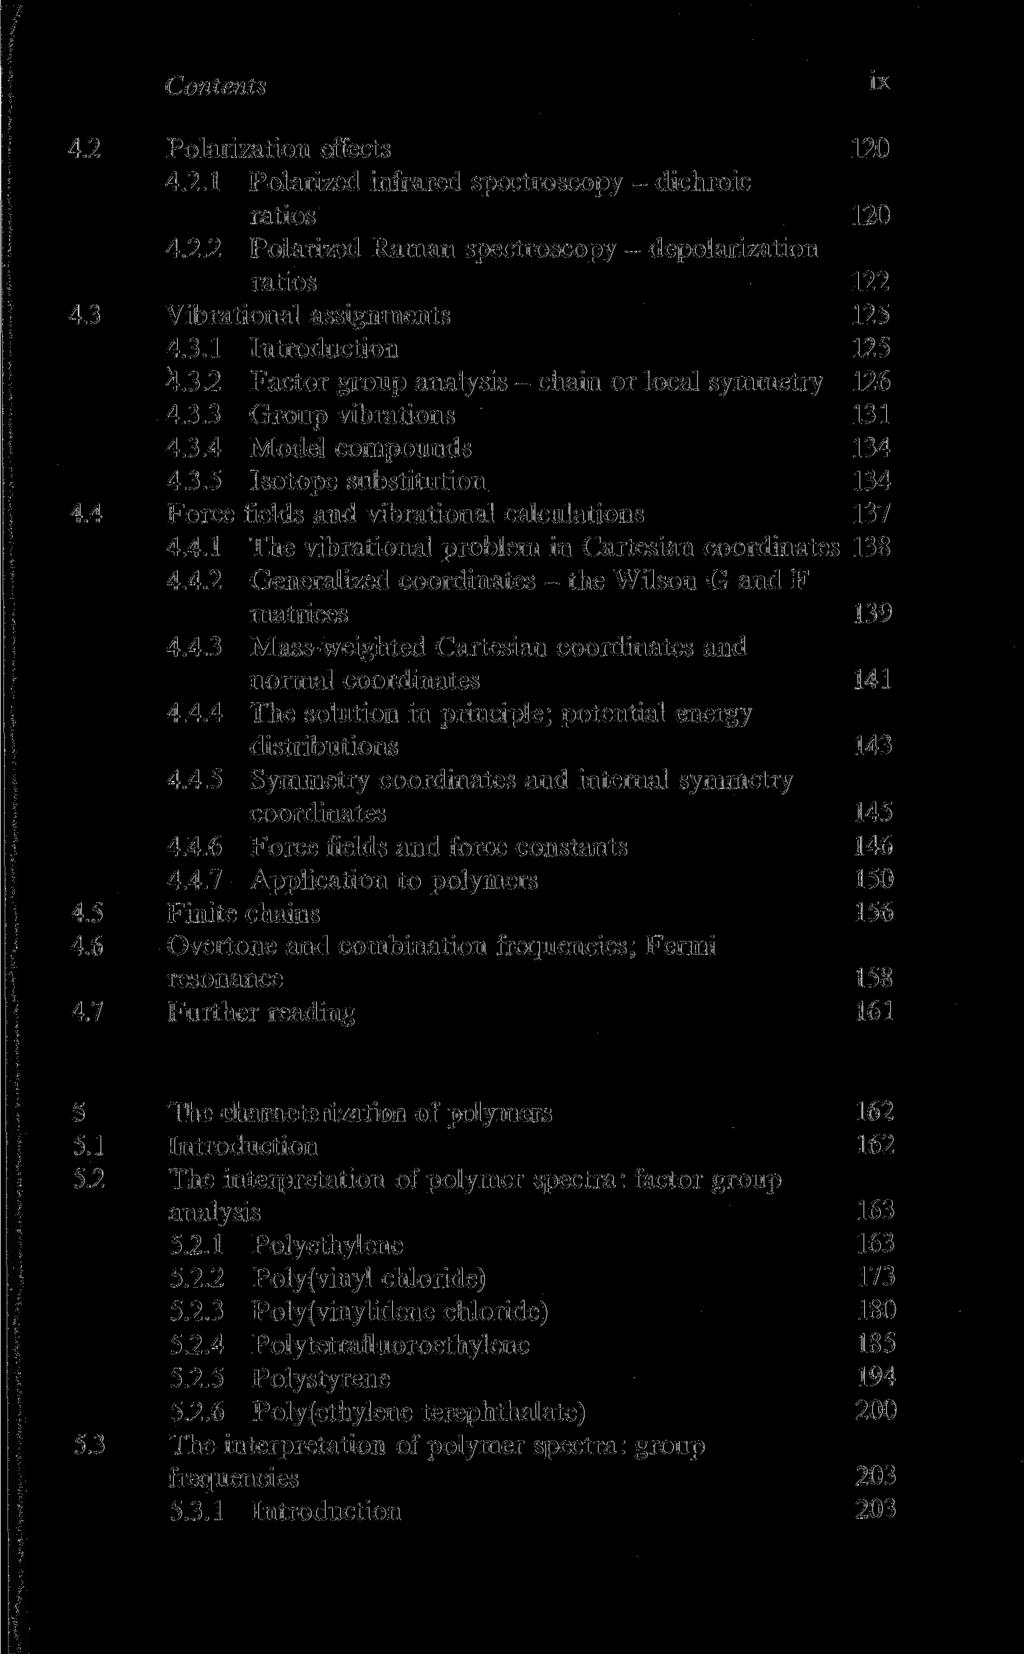 Contents ix 4.2 Polarization effects 120 4.2.1 Polarized infrared spectroscopy - dichroic ratios 120 4.2.2 Polarized Raman spectroscopy - depolarization ratios 122 4.3 Vibrational assignments 125 4.3.1 Introduction 125 4.